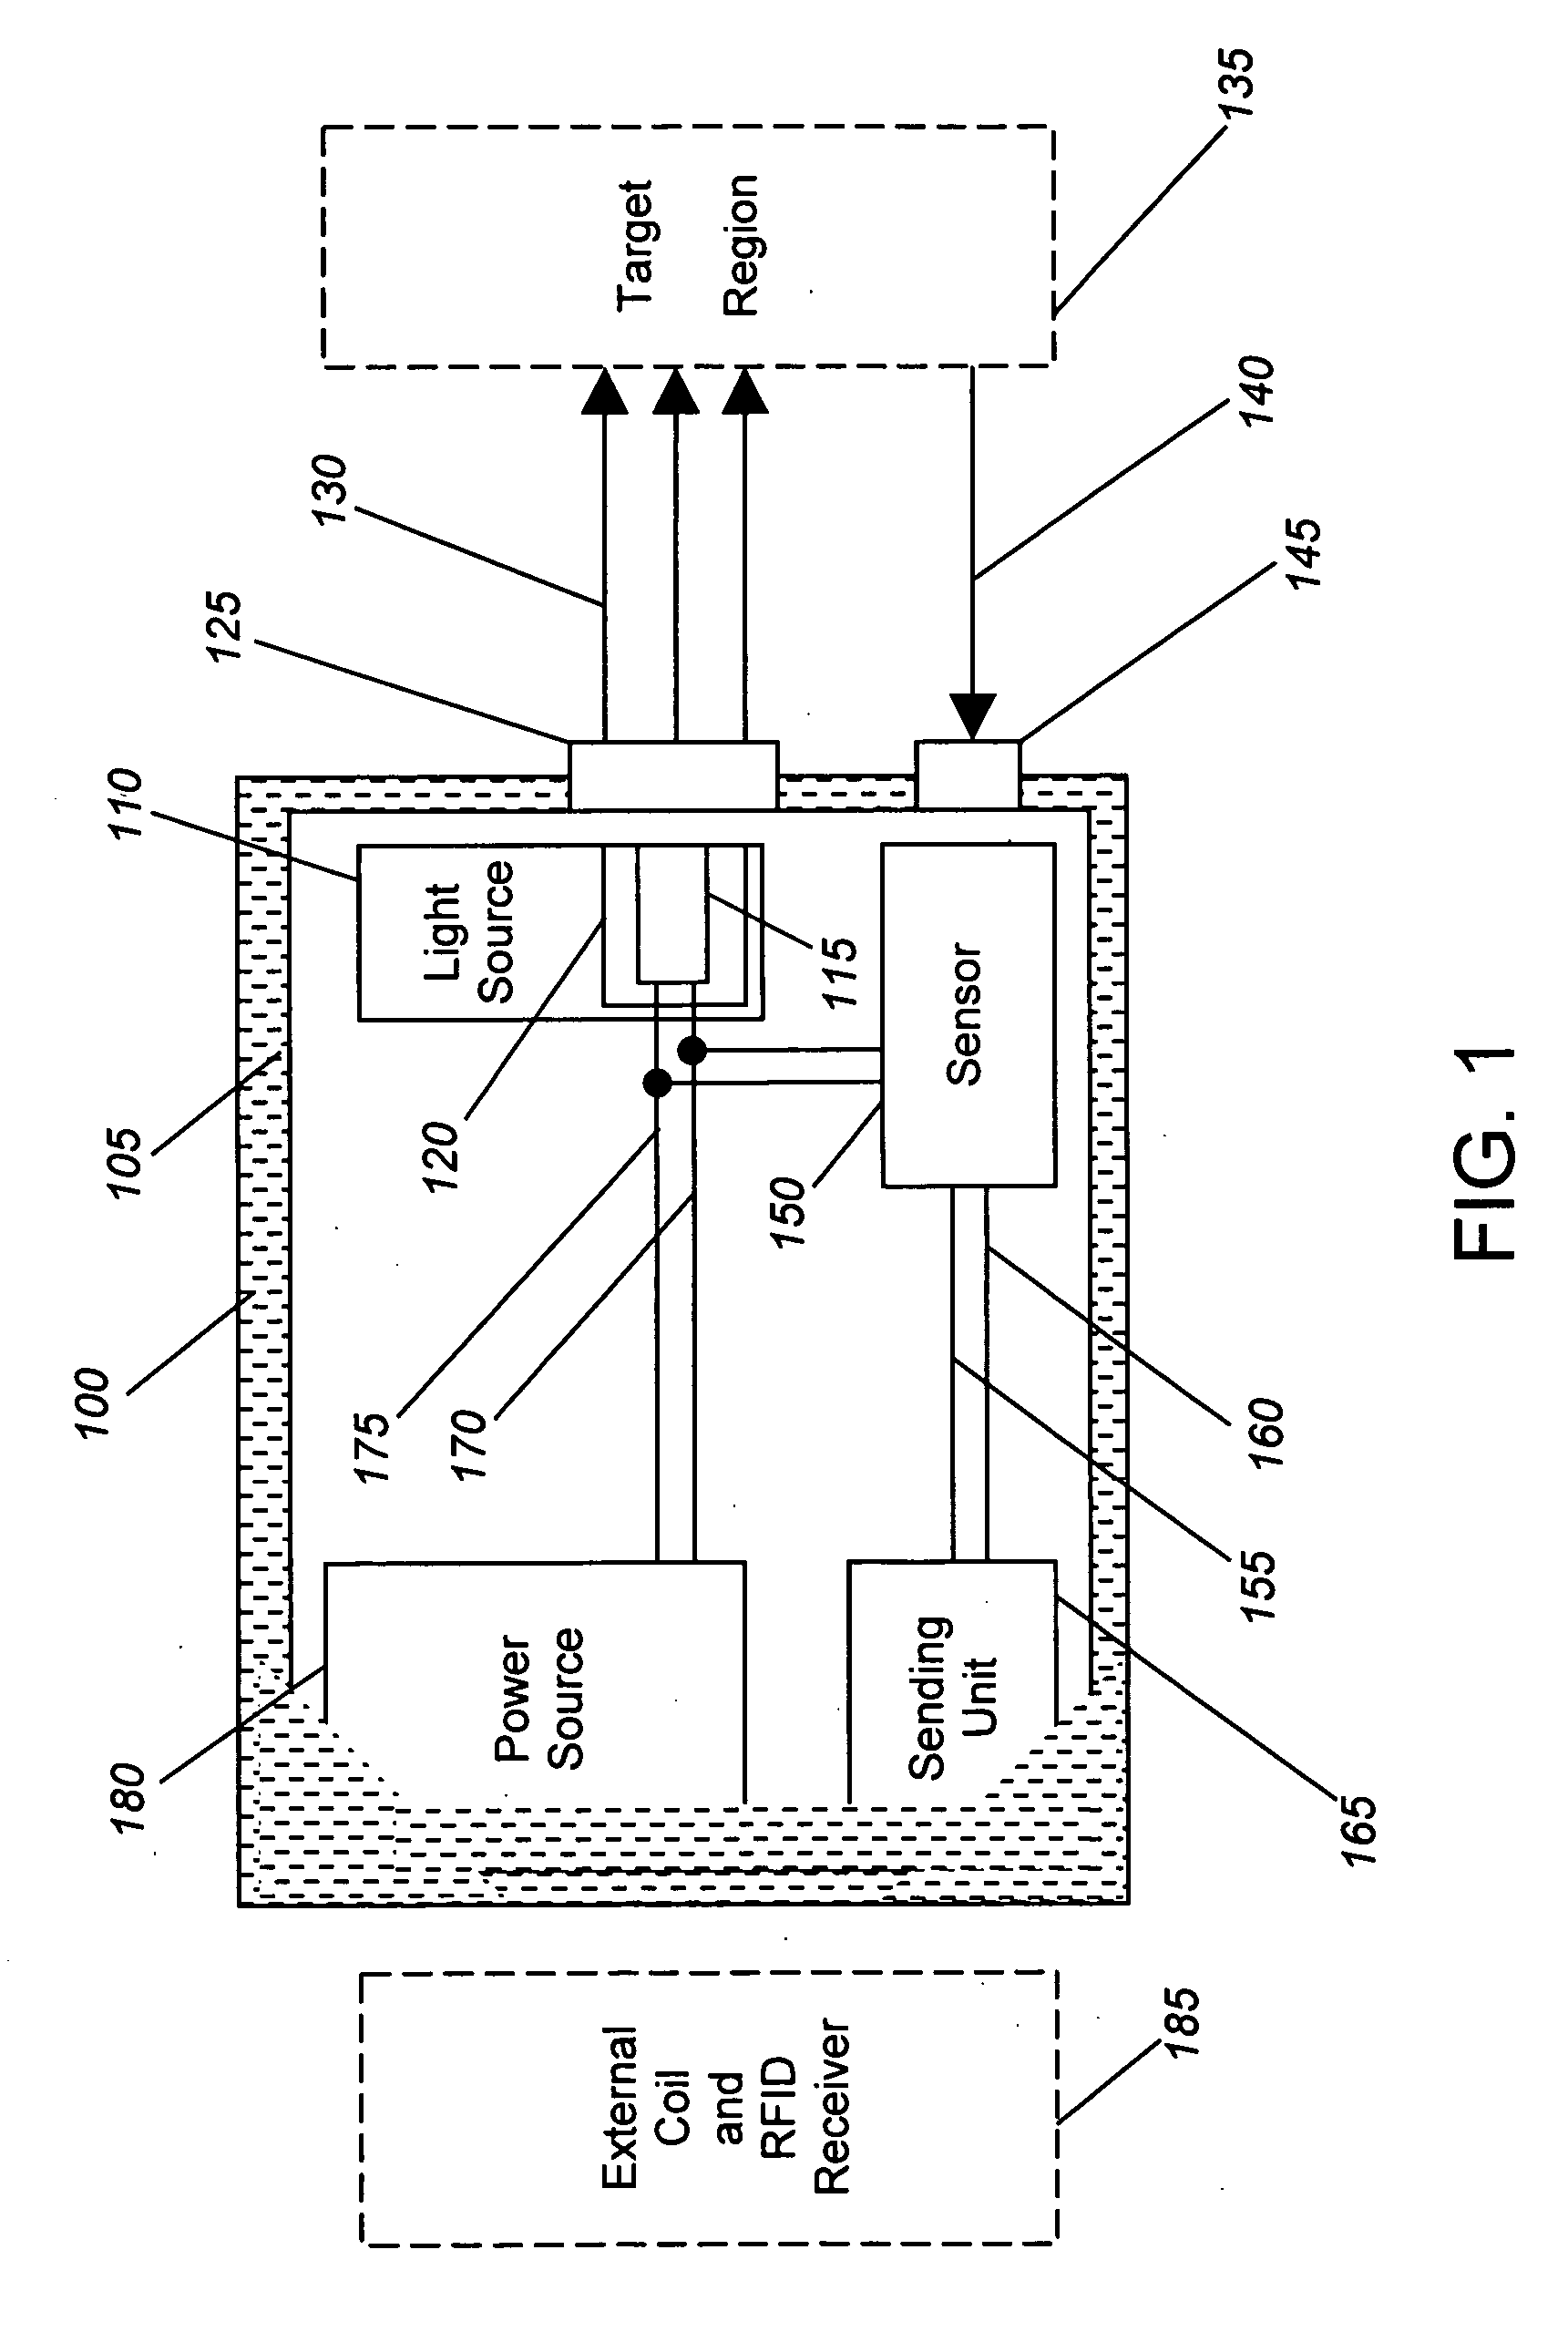 Device and methods for the detection of locally-weighted tissue ischemia